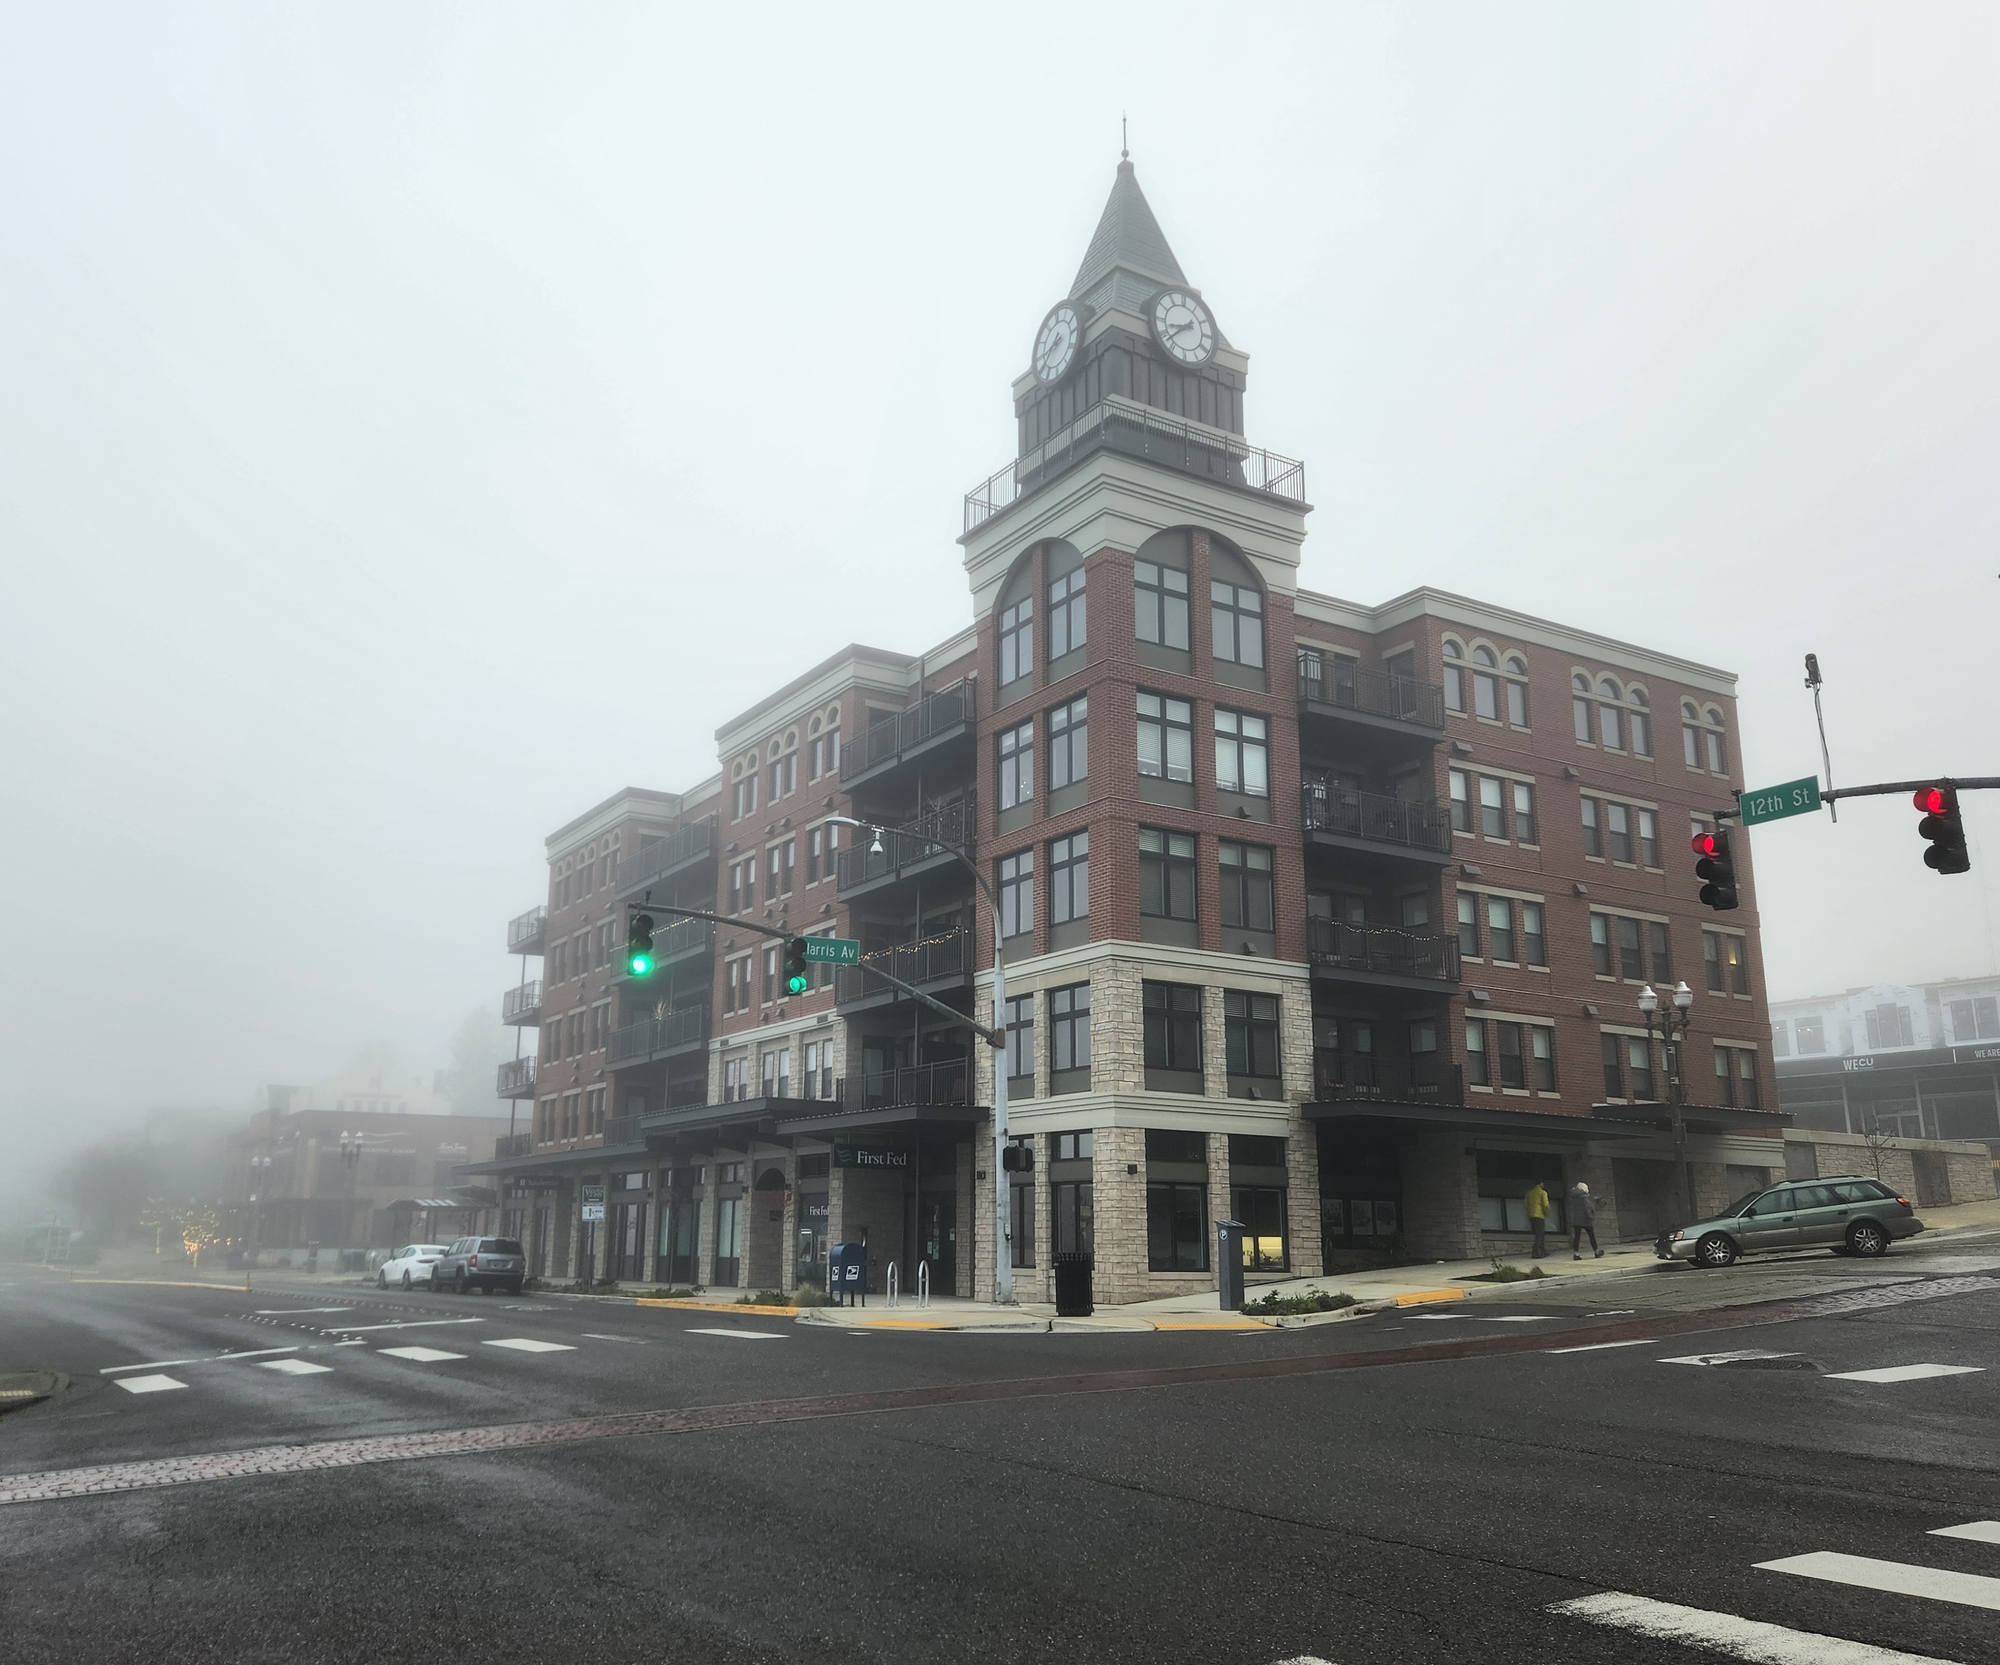 A 5-story red brick building with a corner clocktower surrounded by fog. 